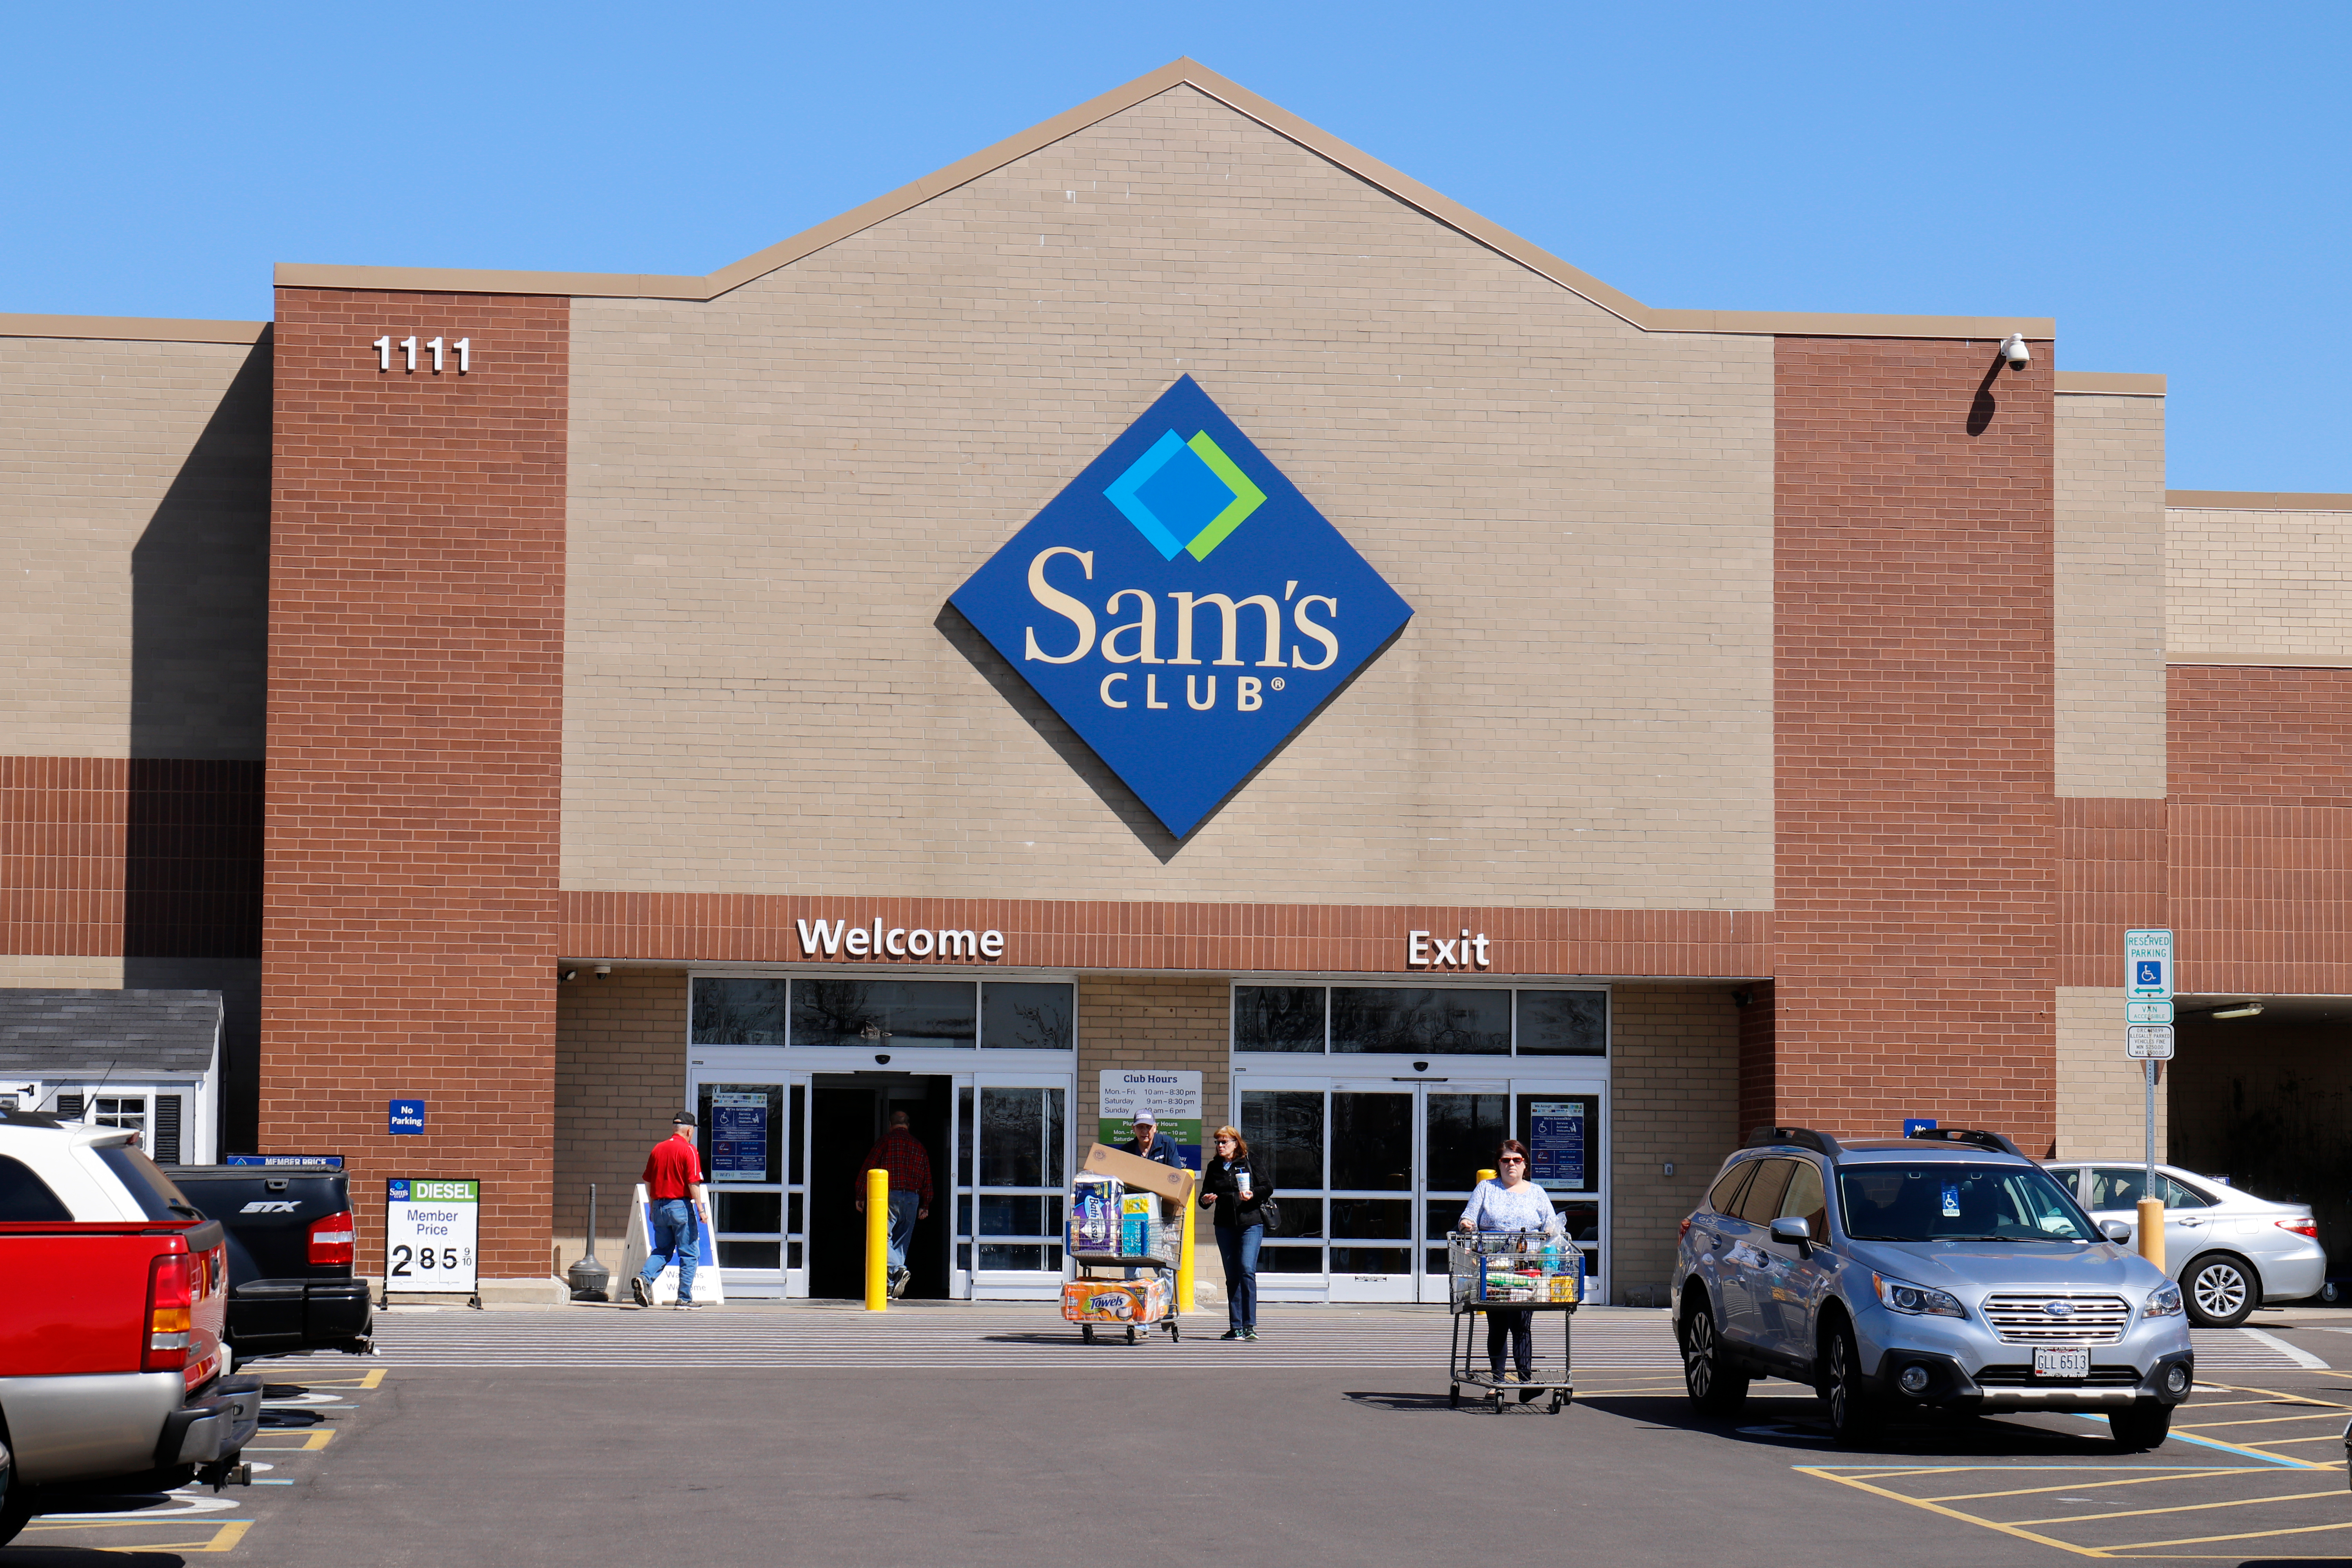 The front entrance of a Sams Club store